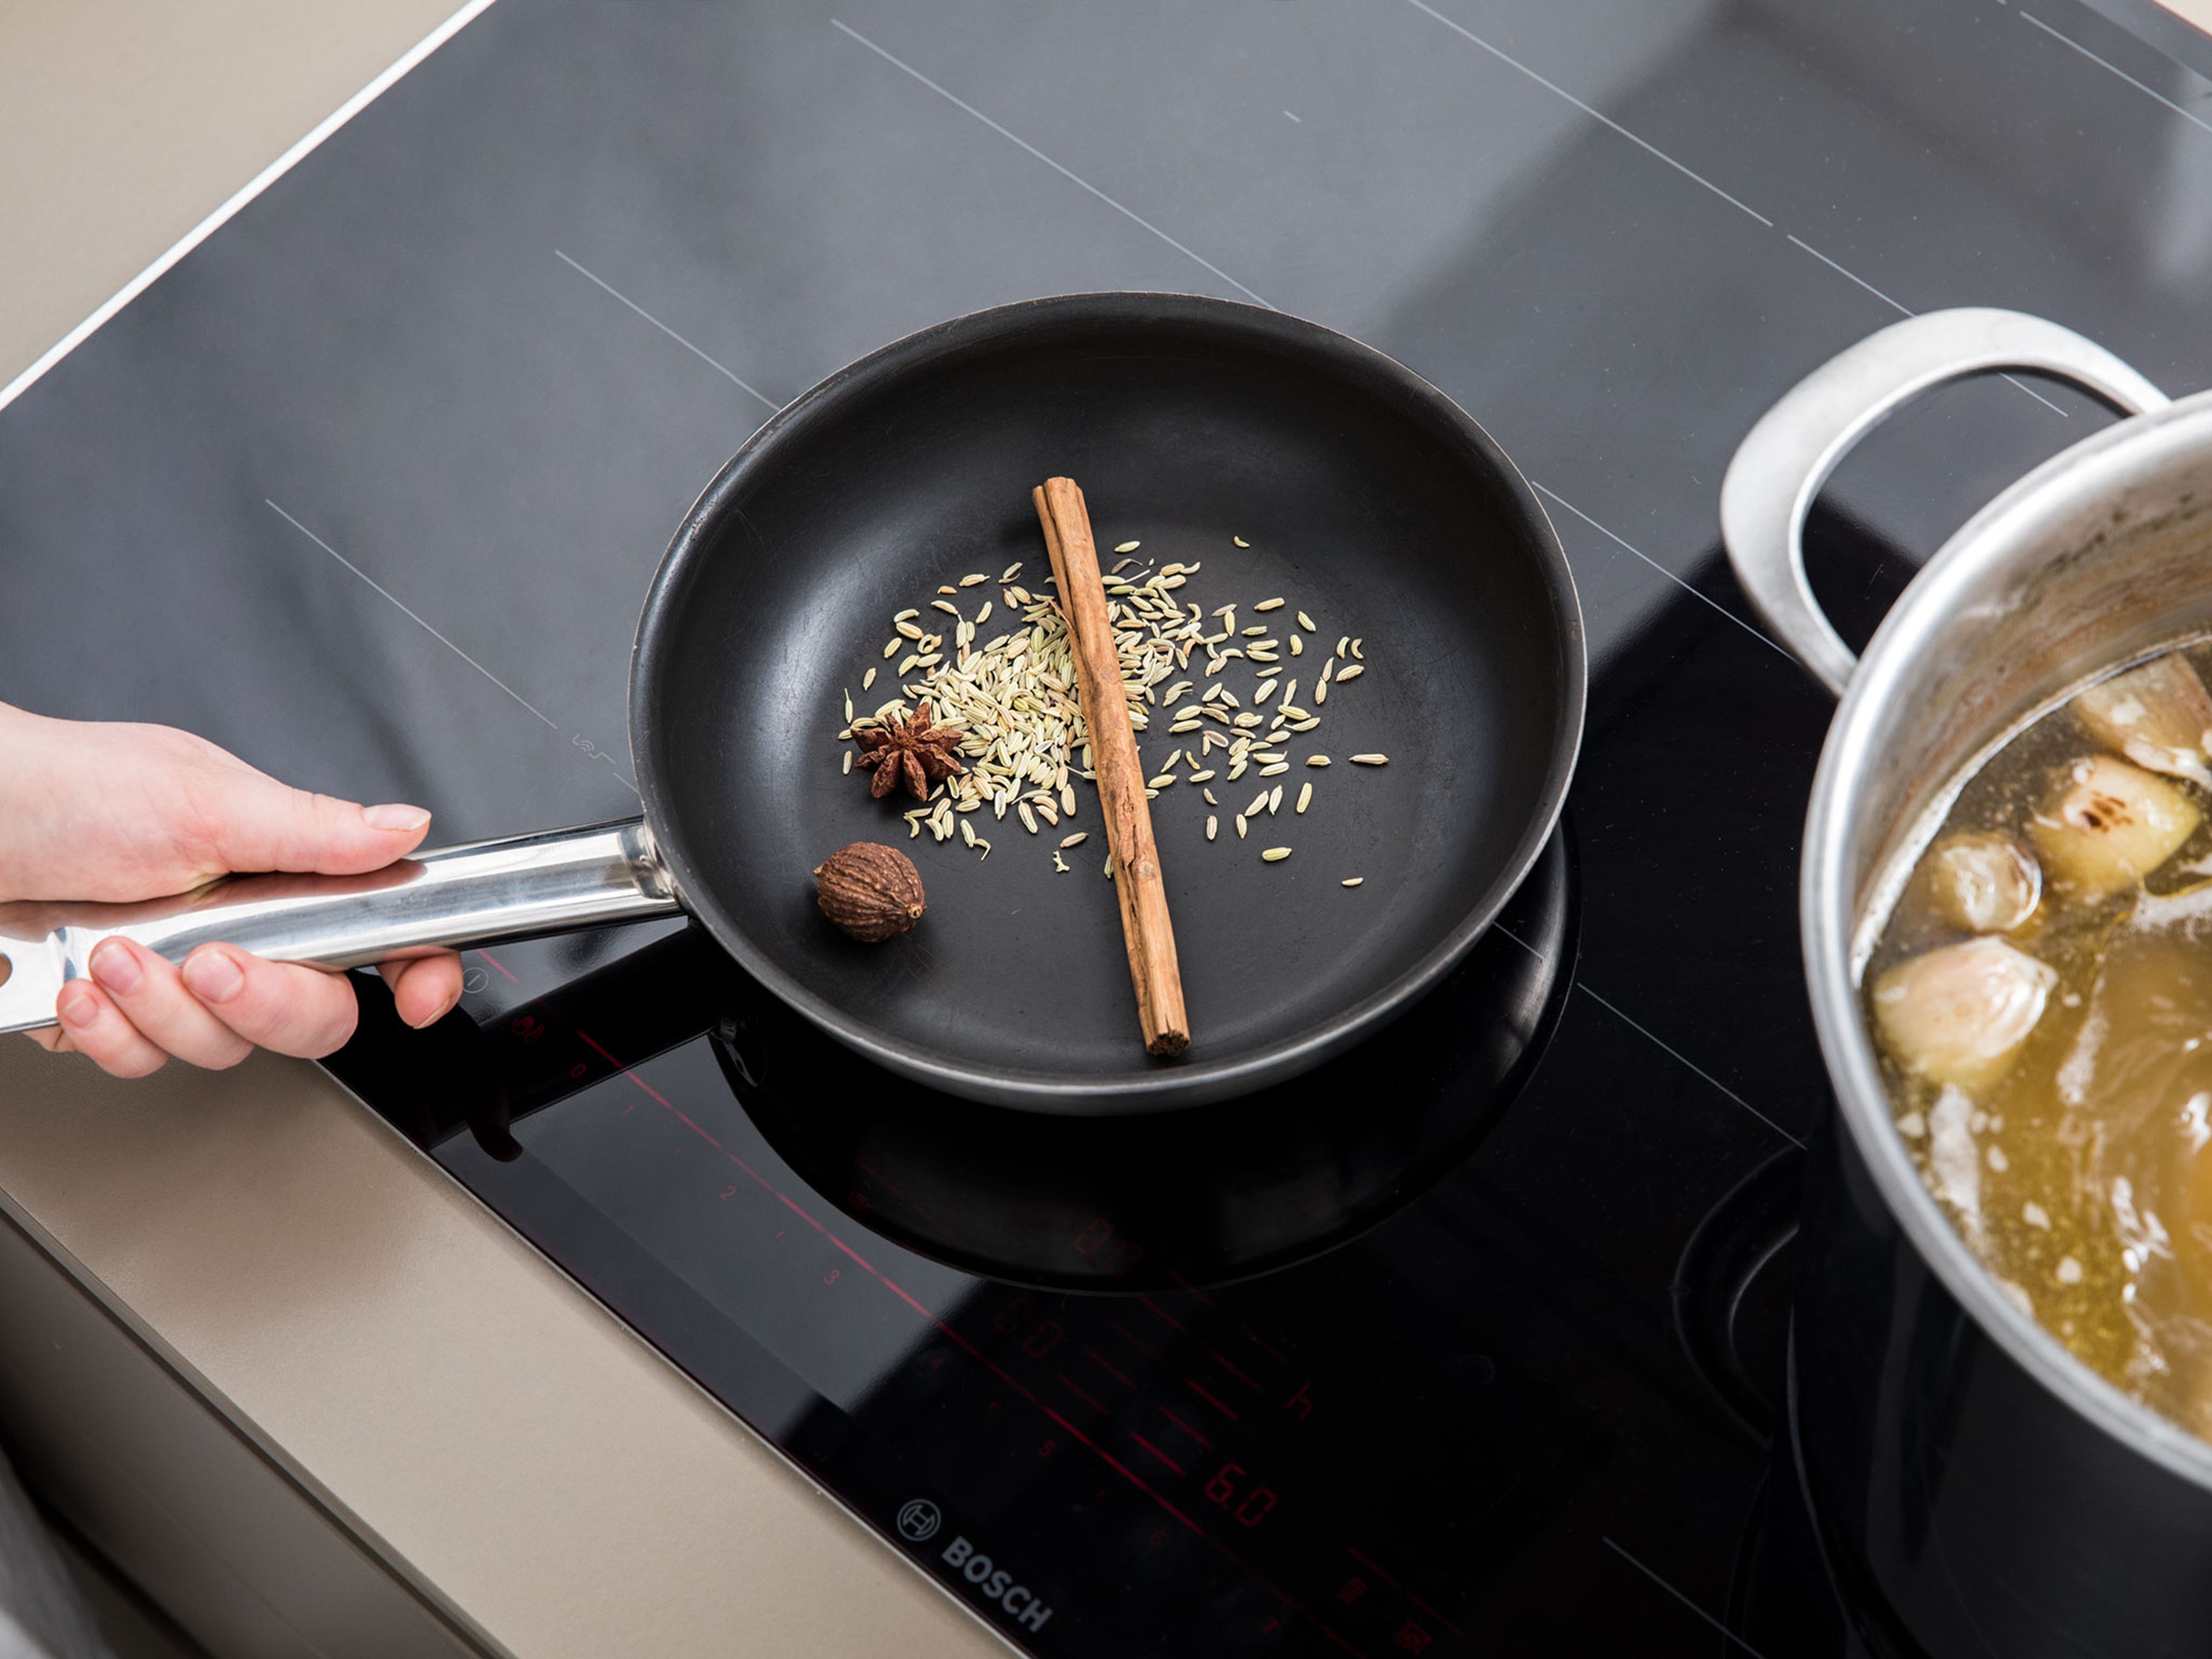 Add cardamom pod, fennel seeds, cinnamon stick an star anise to a frying pan and fry until fragrant. Add to the pot. Season the broth with fish sauce, salt, and sugar. Let simmer for approx. 30 min.